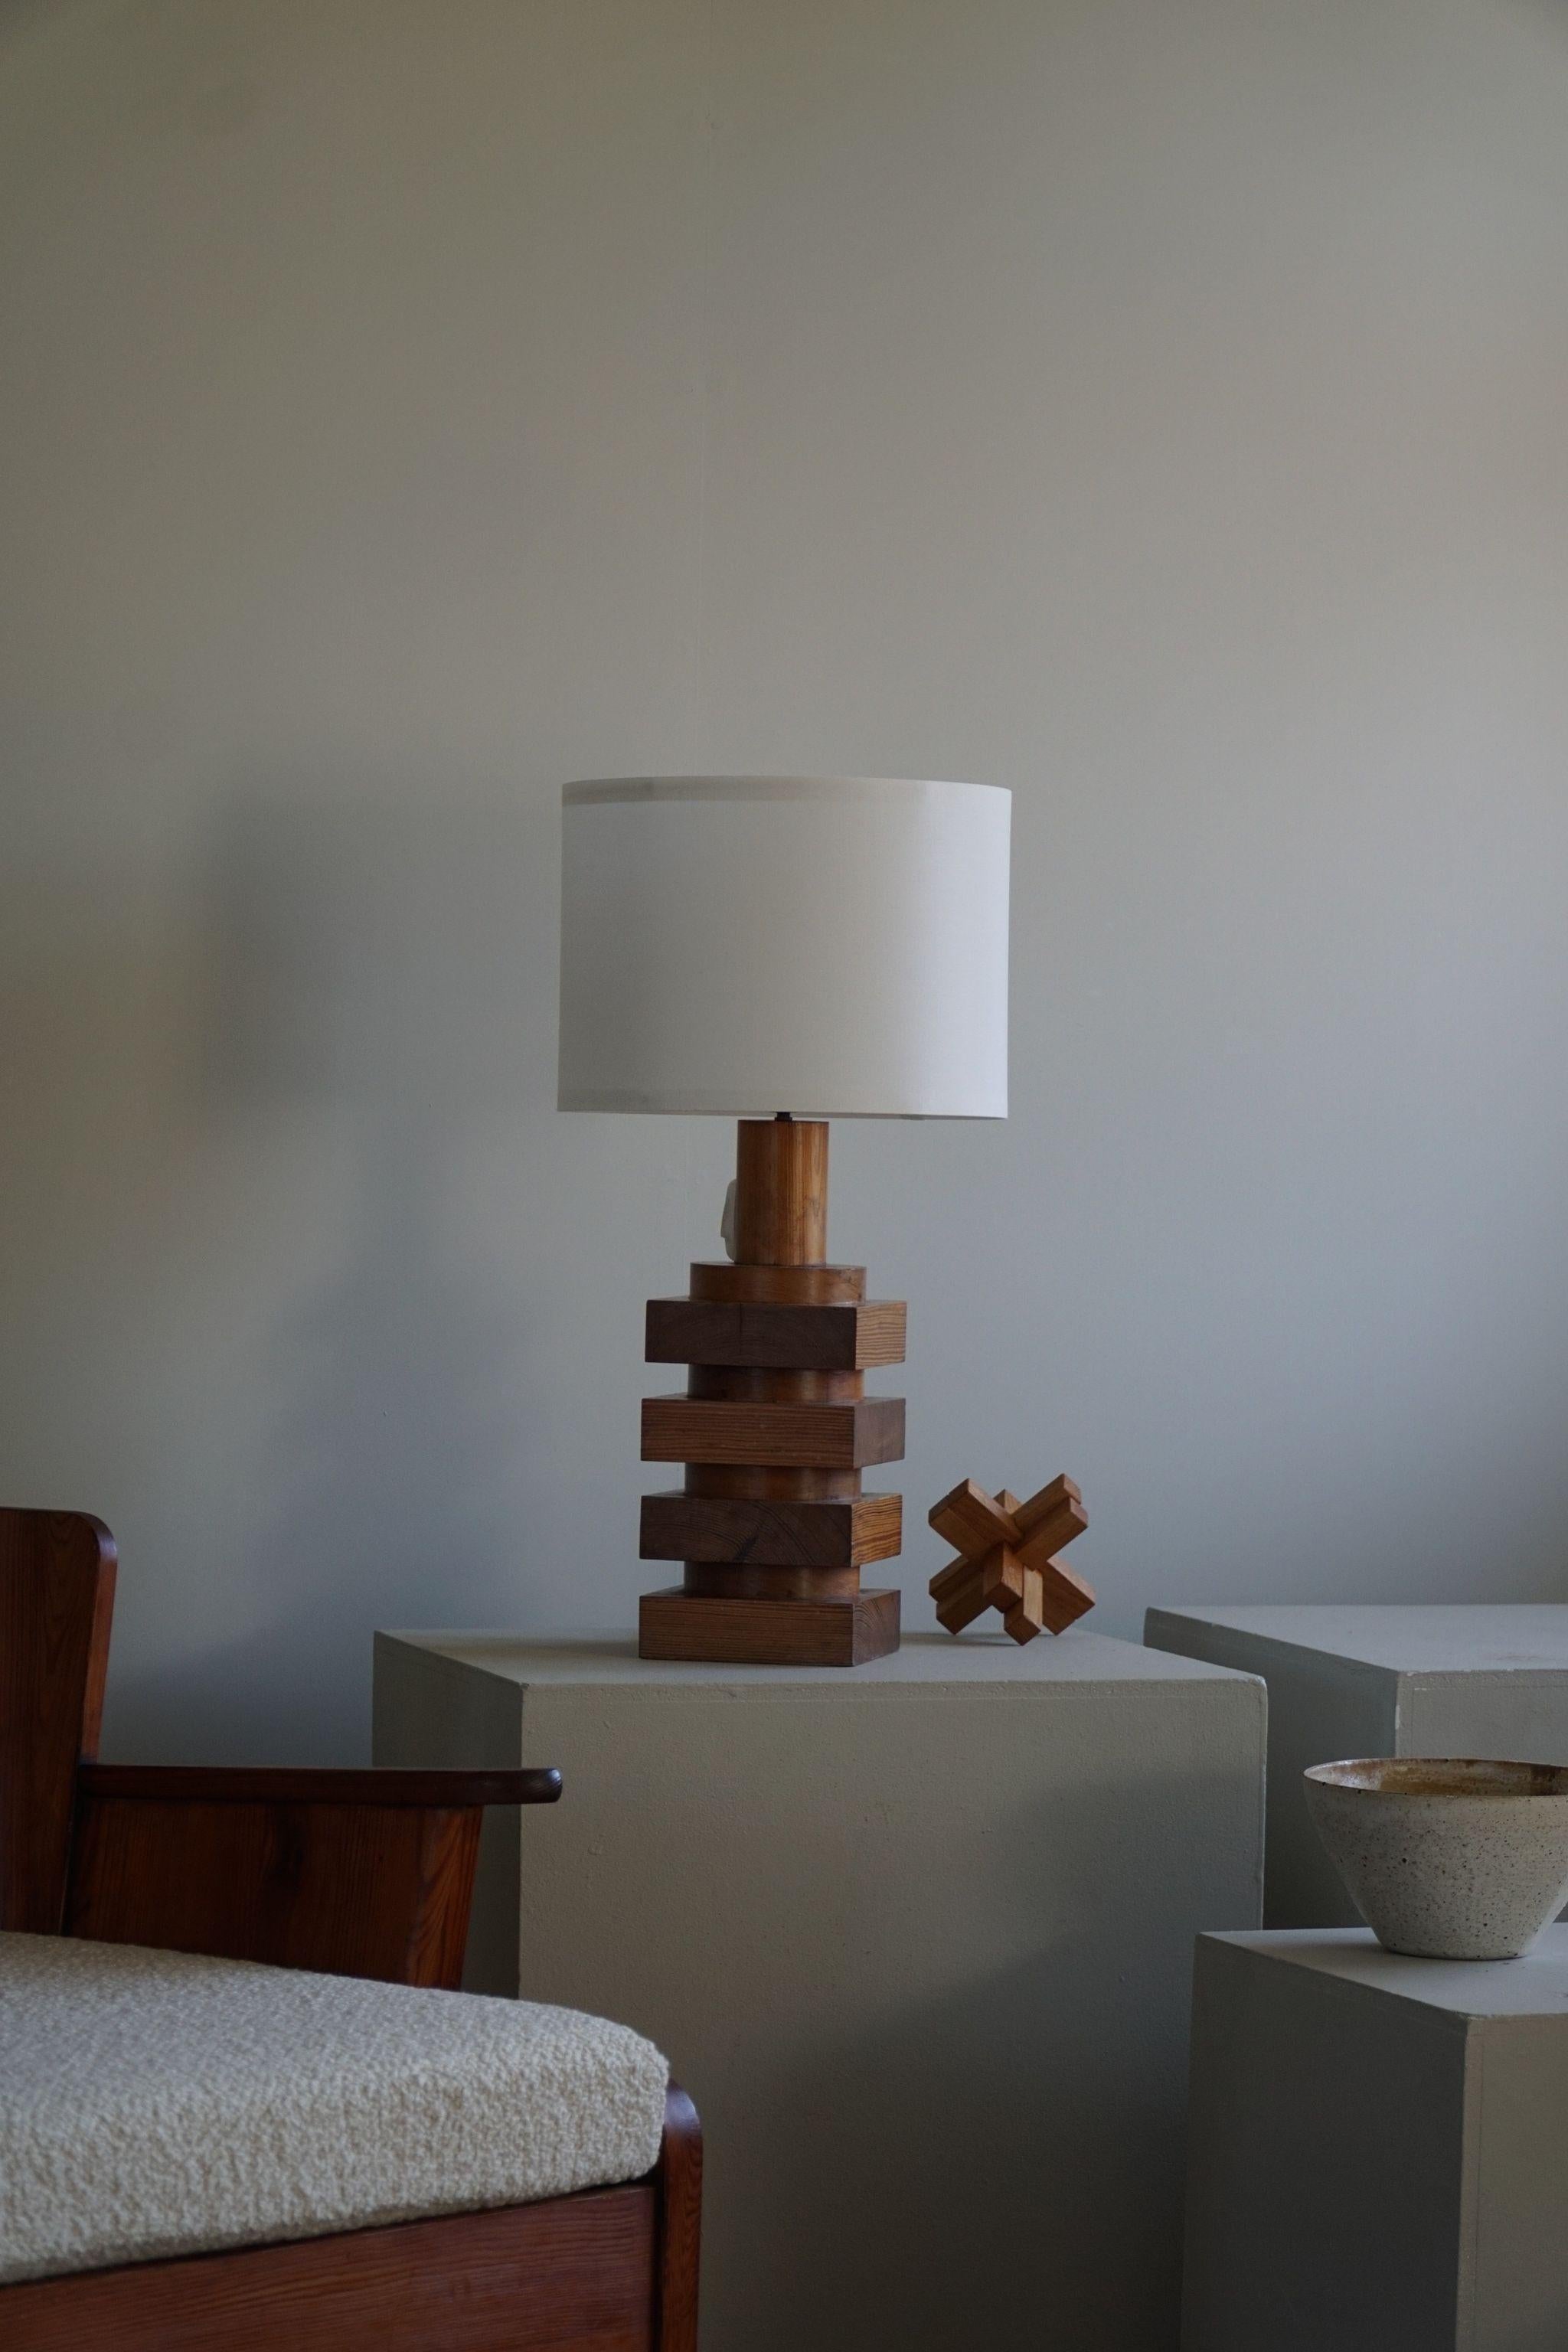 Such a fine sculptural Swedish modern table lamp in pine from the 1960s. The shape and charm in the aged wood of this piece is fantastic. 
The overall impression of these midcentury table lamps is really good.
It will complement many interior